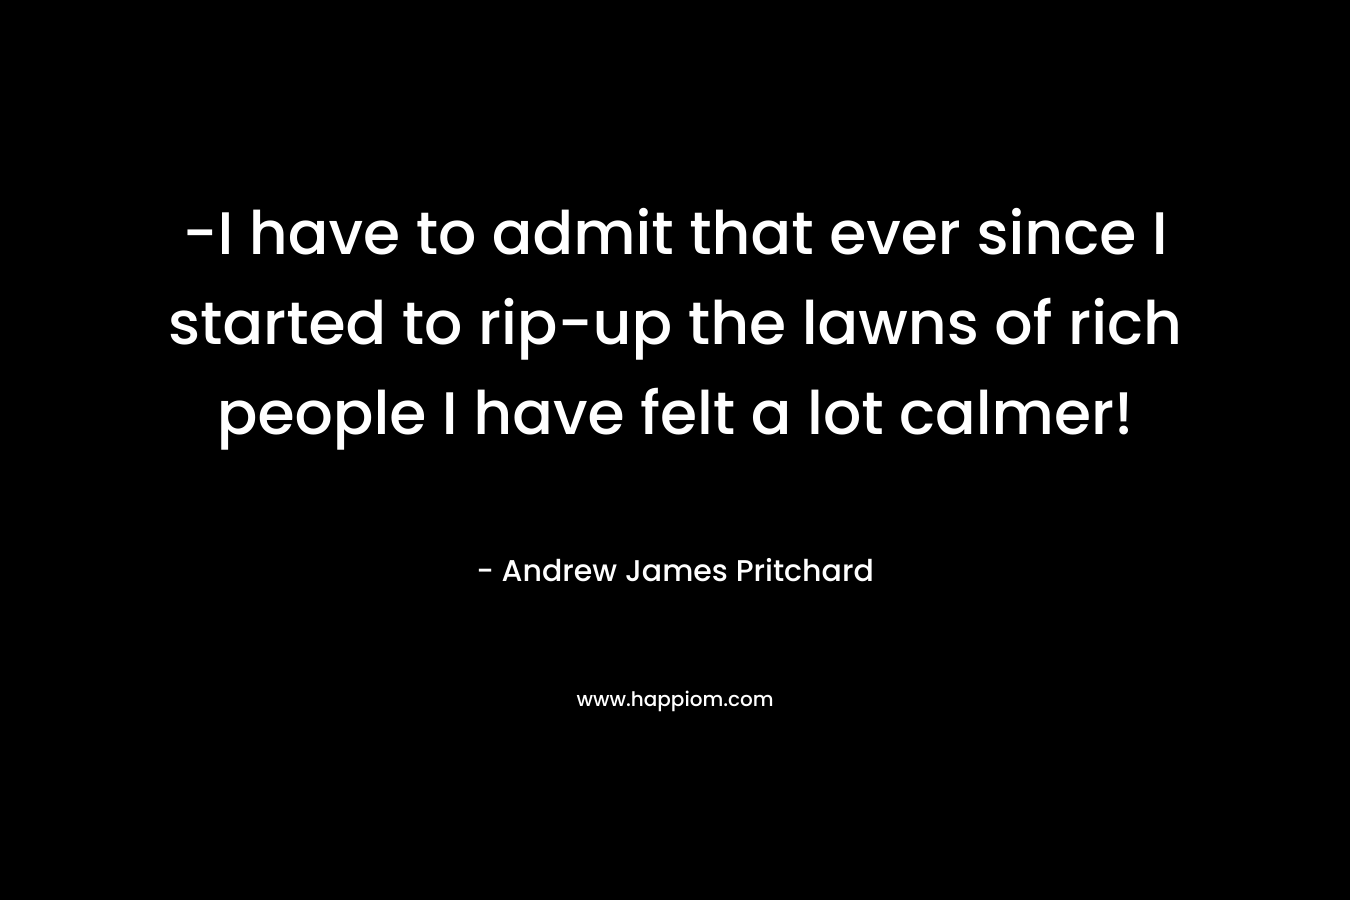 -I have to admit that ever since I started to rip-up the lawns of rich people I have felt a lot calmer!